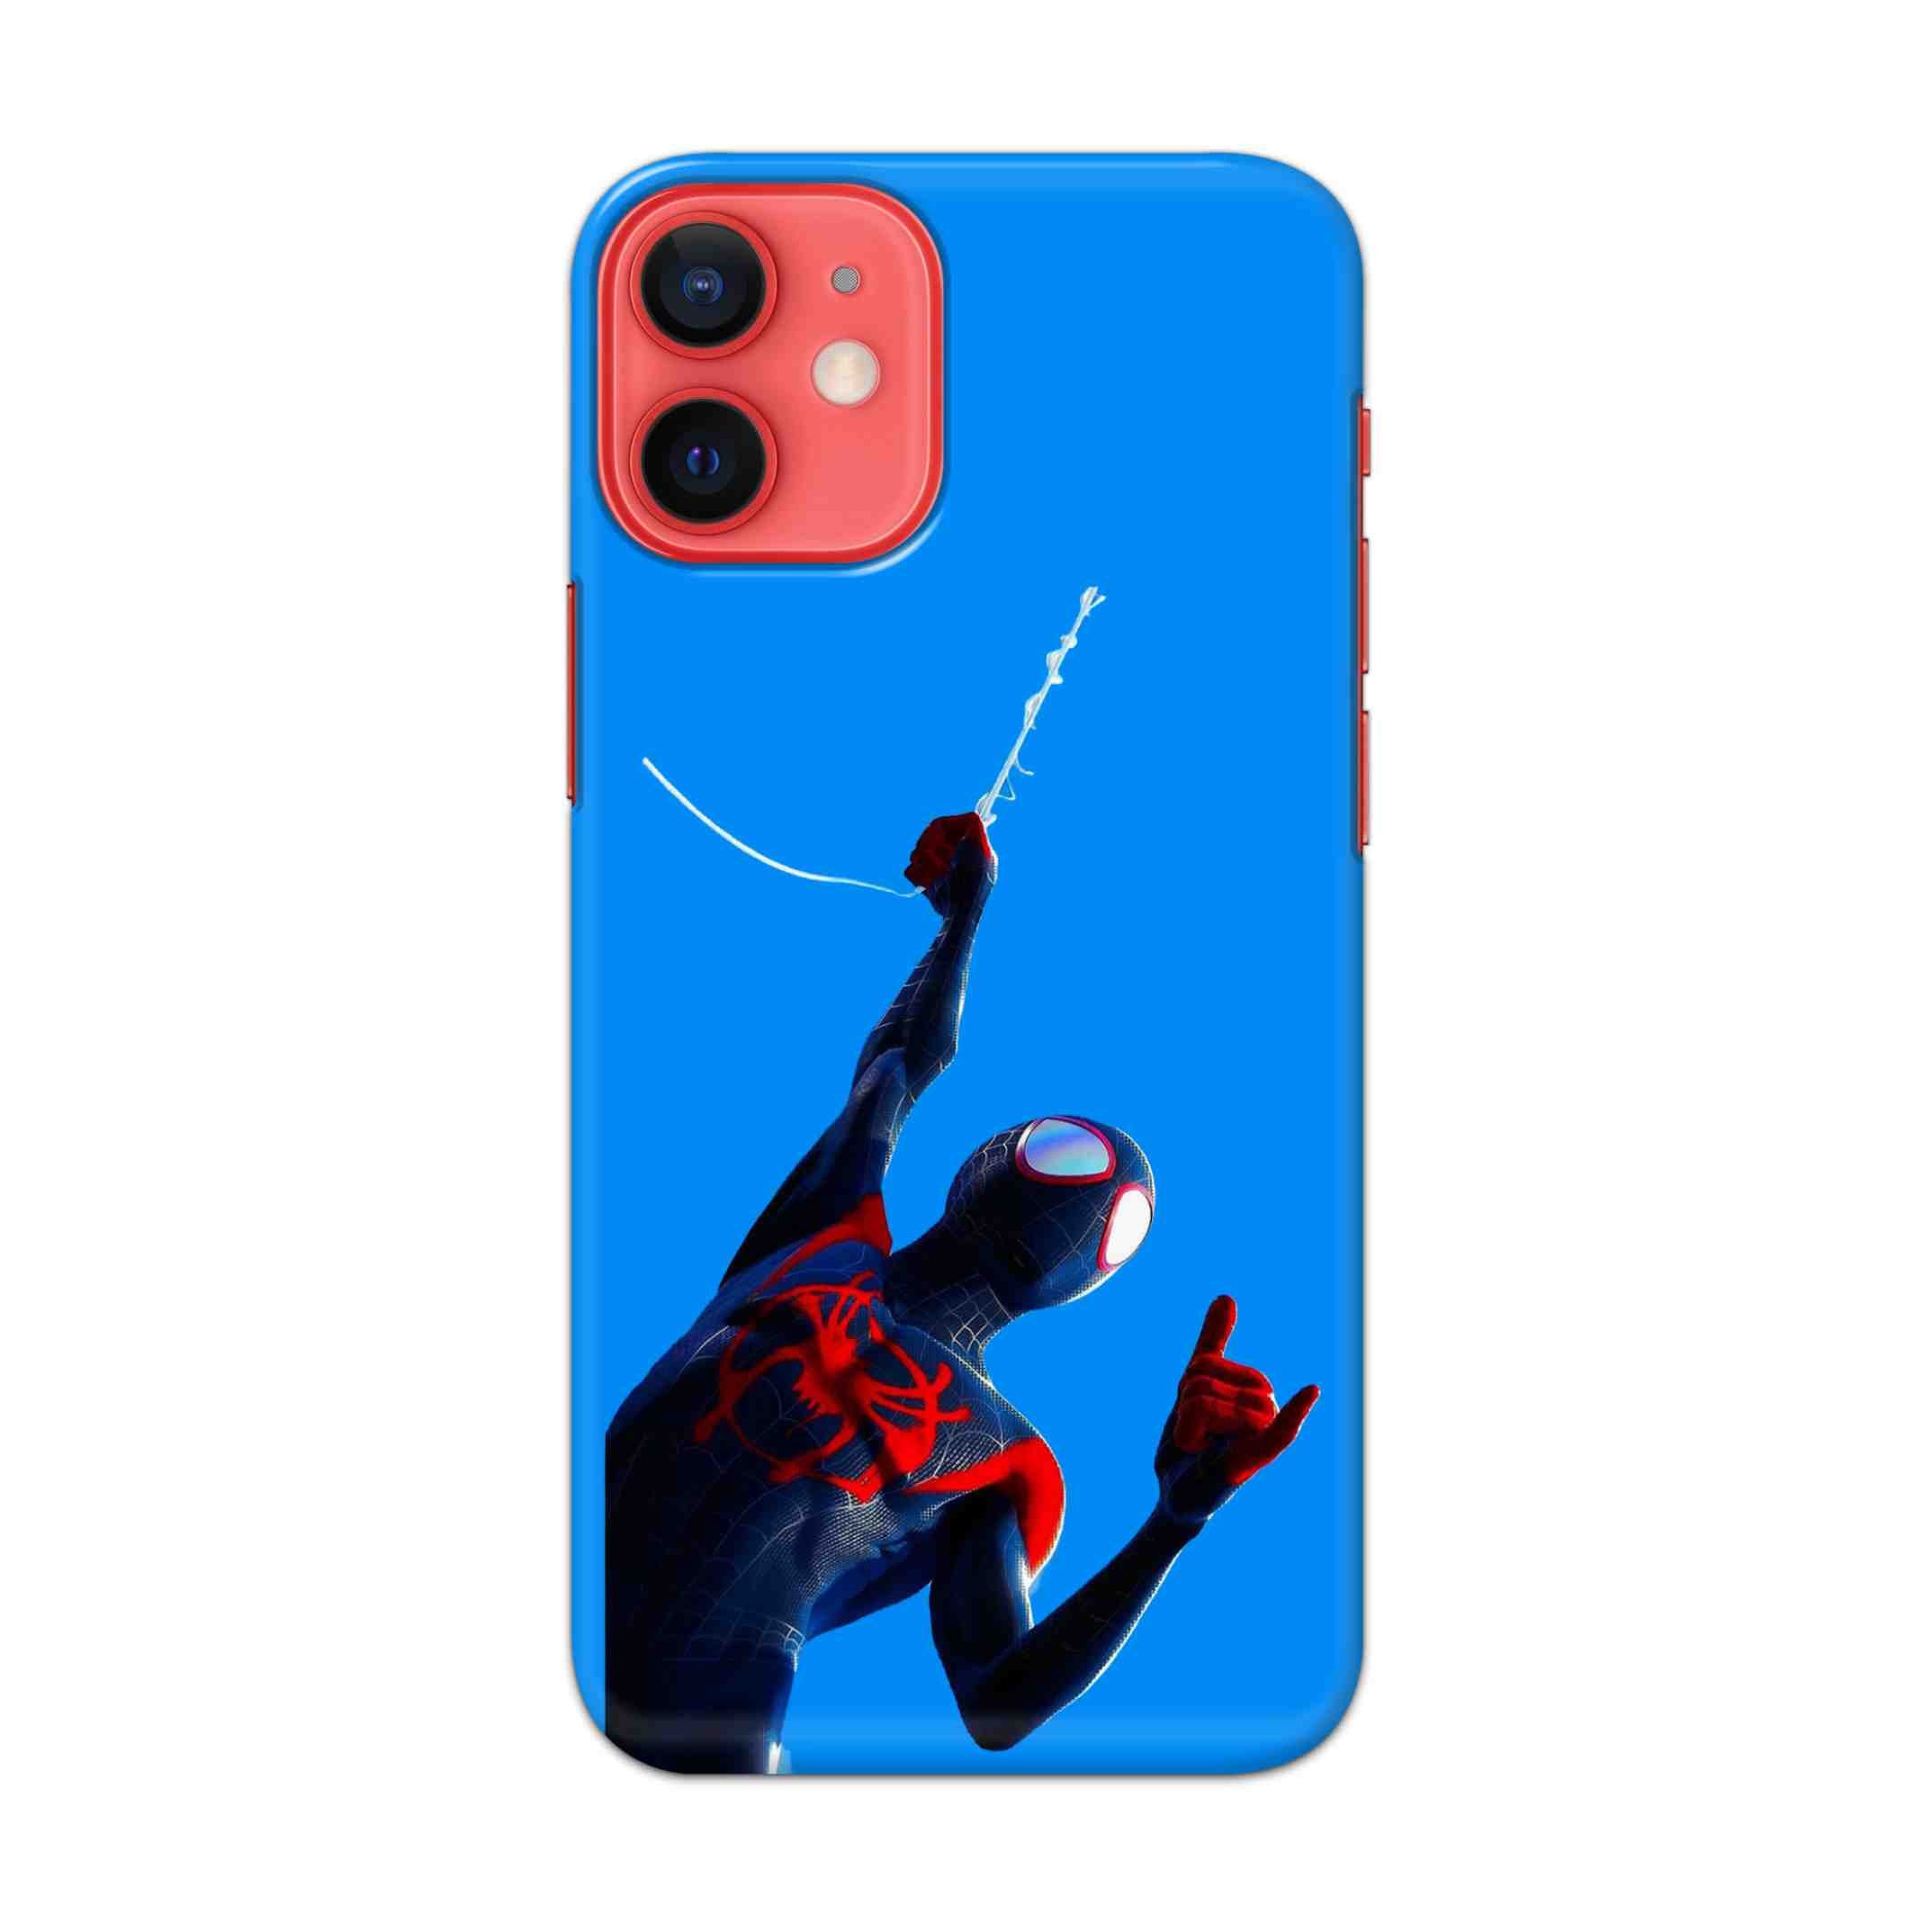 Buy Miles Morales Spiderman Hard Back Mobile Phone Case/Cover For Apple iPhone 12 mini Online